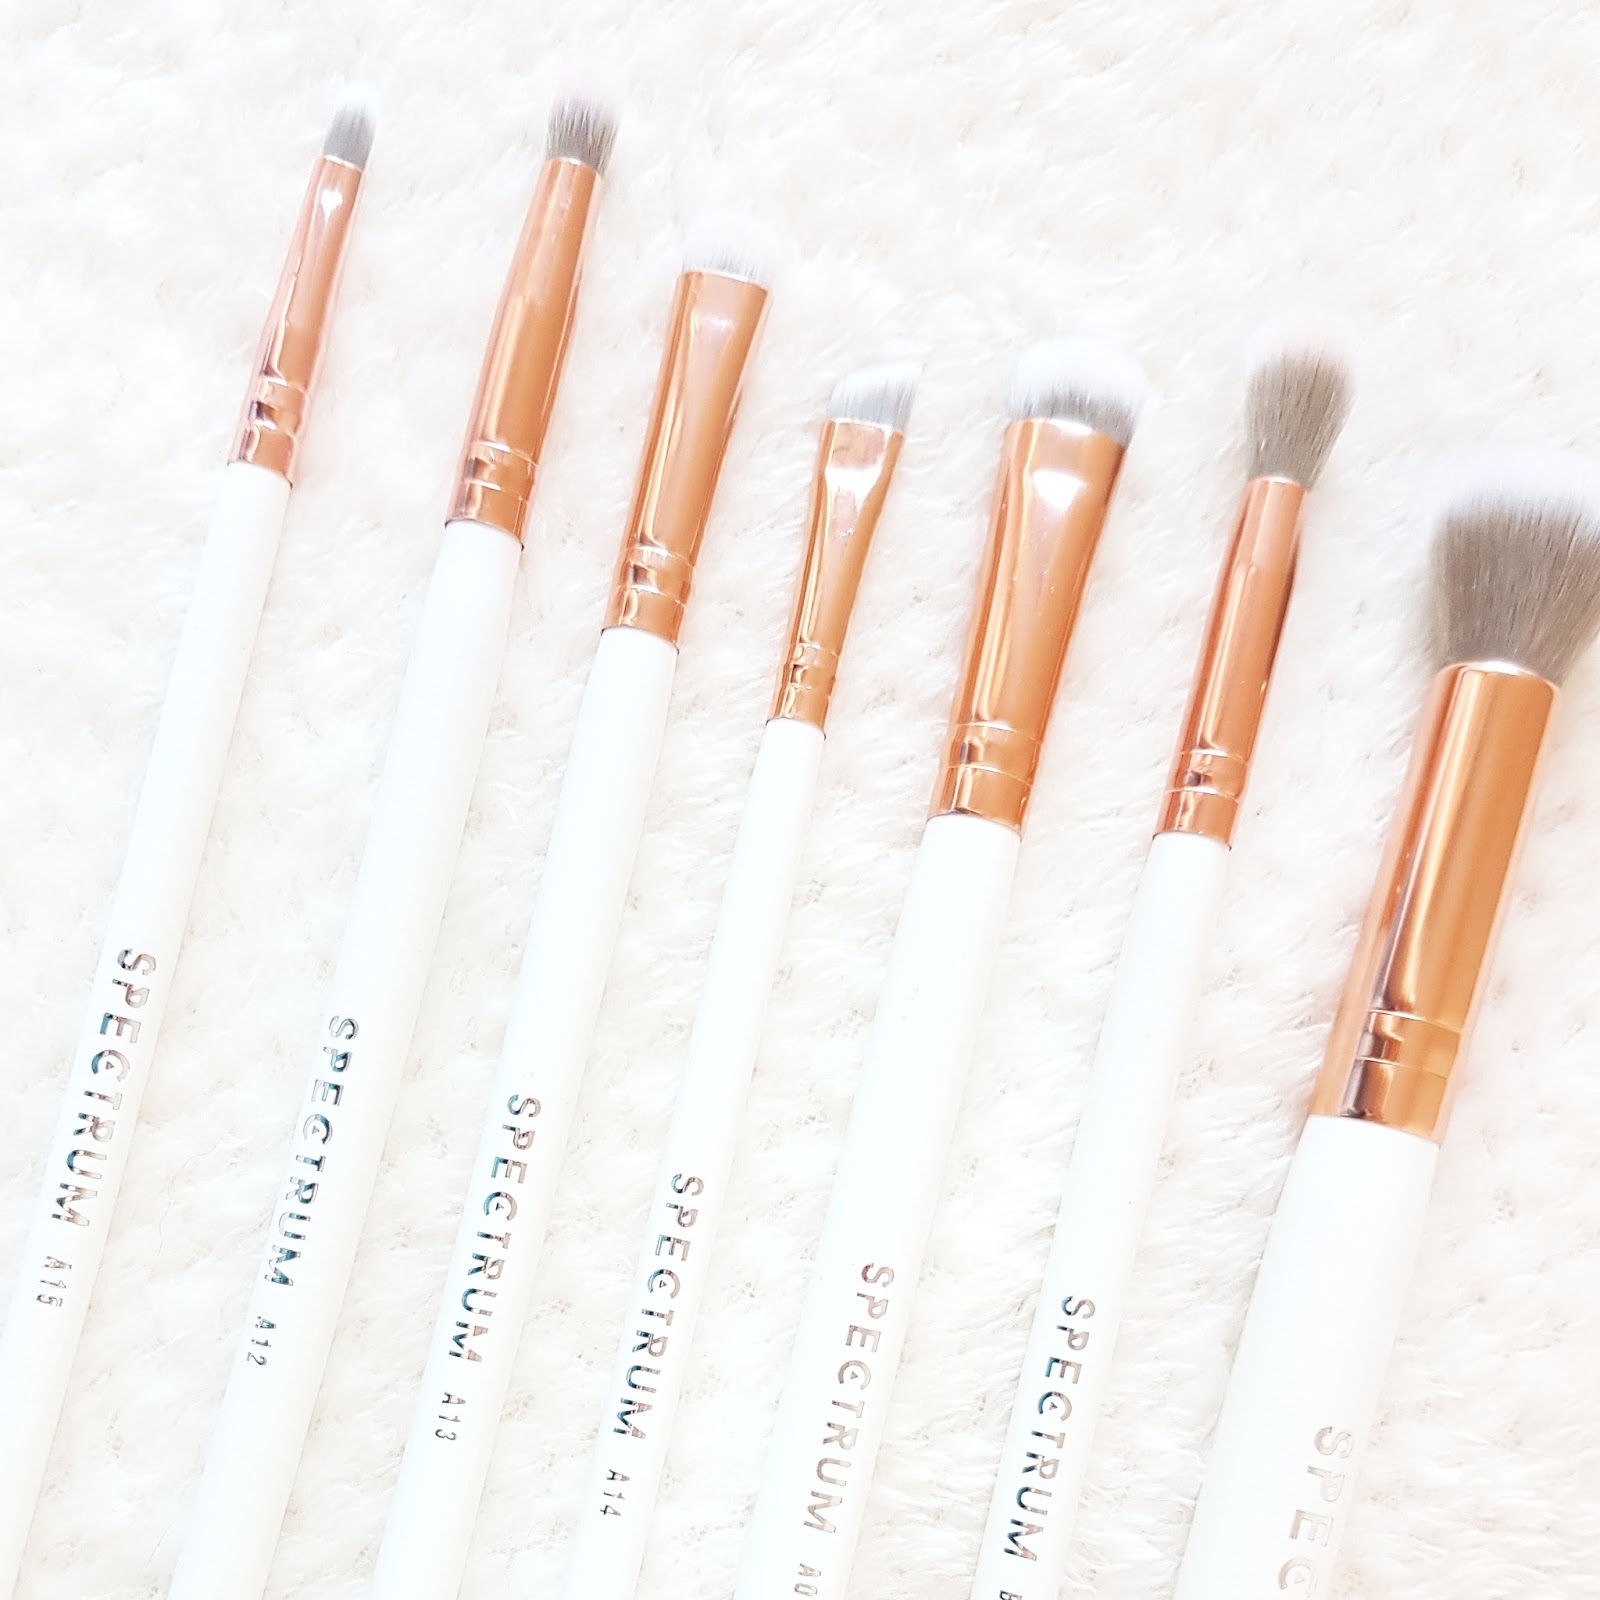 The World's Most 'Instagram-able' Makeup Brushes? | Spectrum Collections White Marbleous 12 Set - Bookish Bluebird